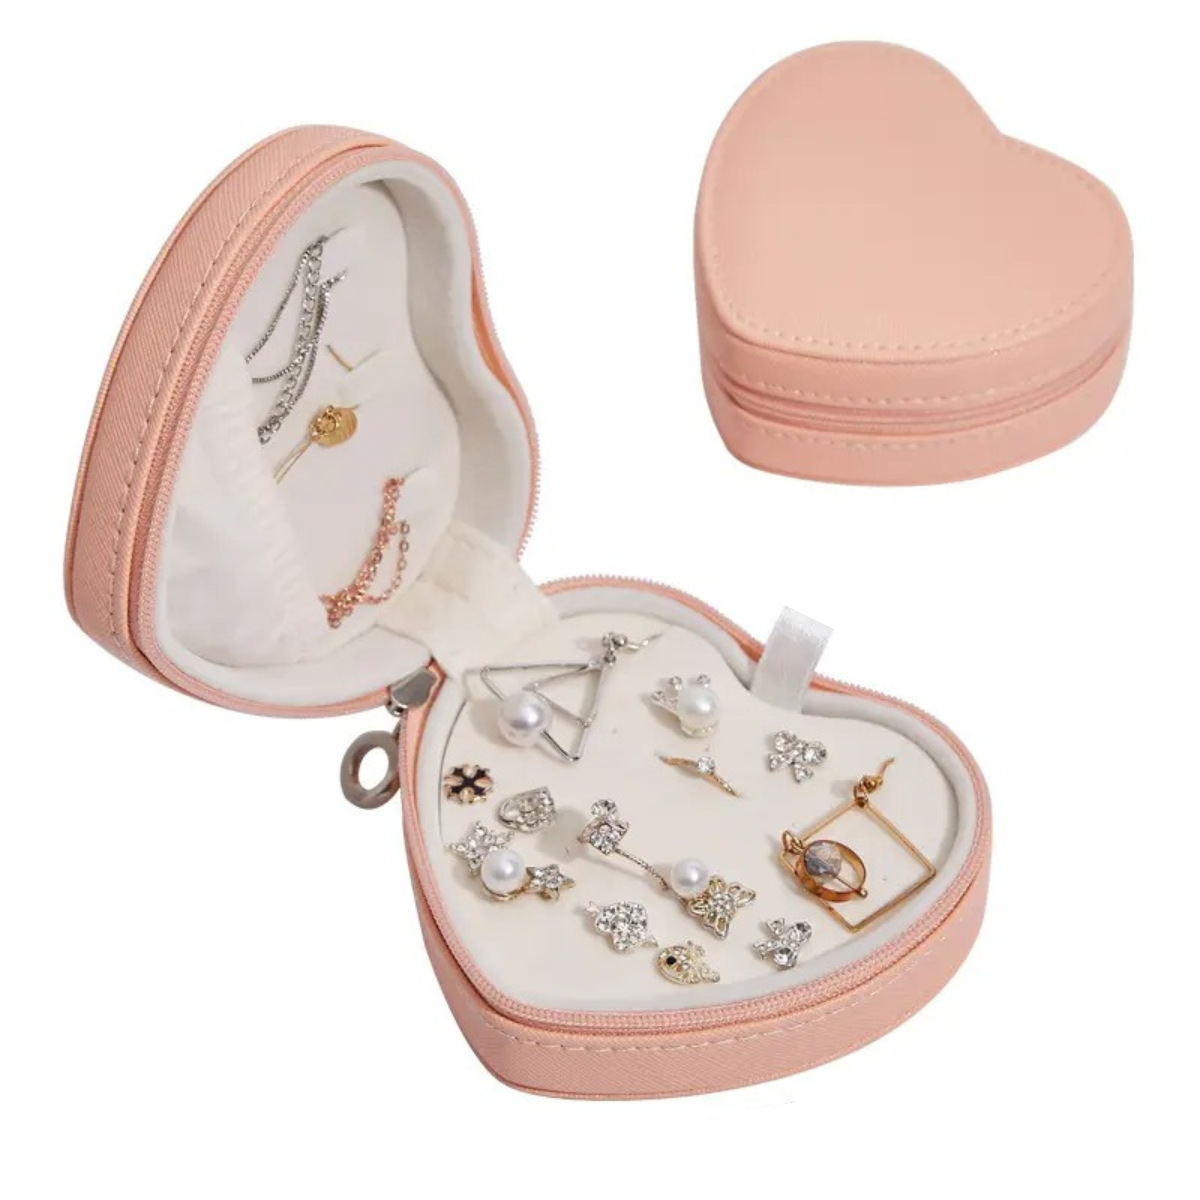 Belle&Rose™ Travel Jewelry Case